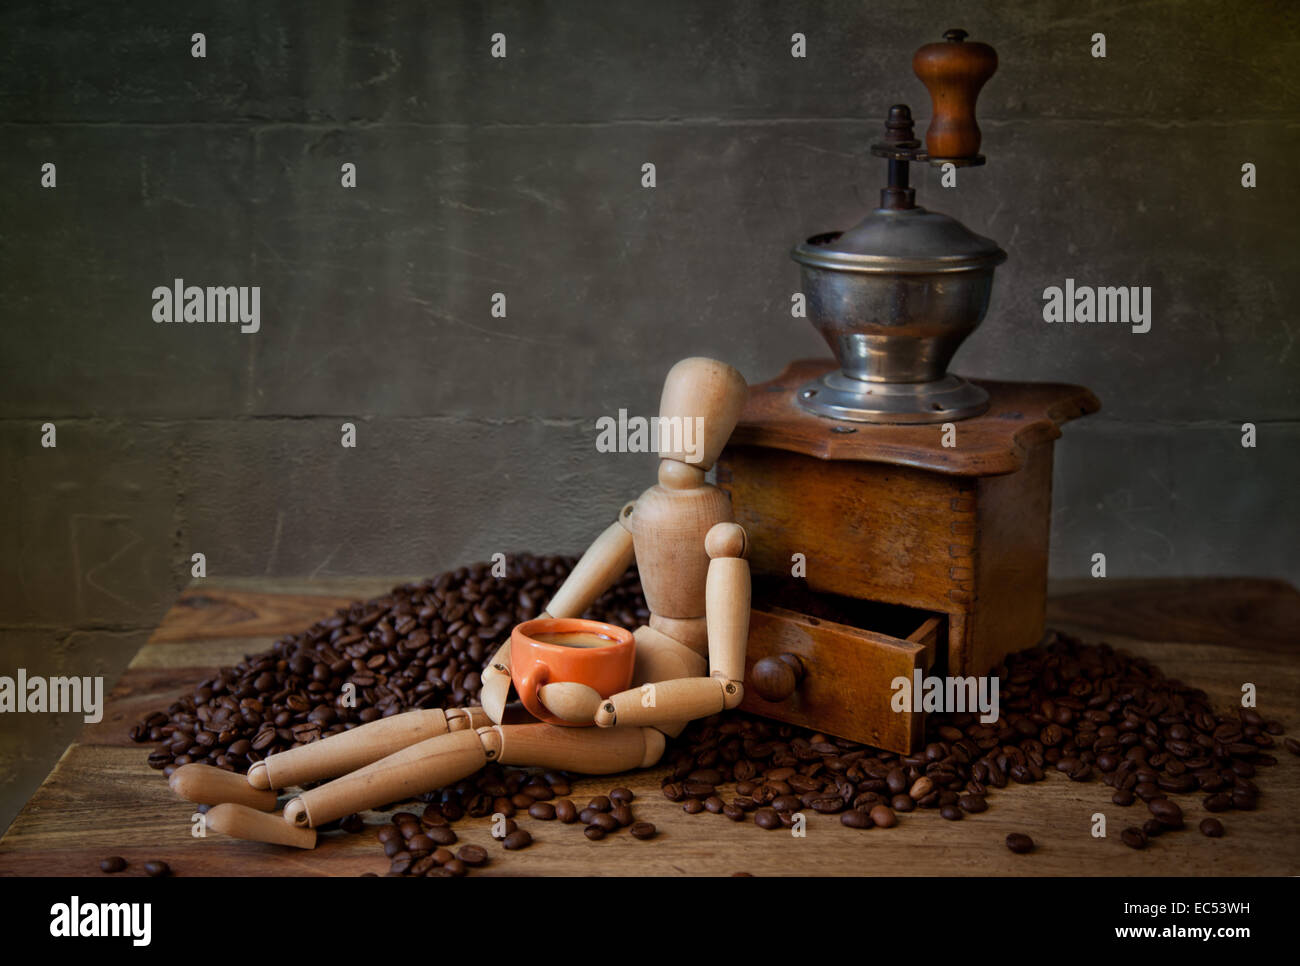 Still Life with Coffee grinder and jointed doll working the mill Stock Photo